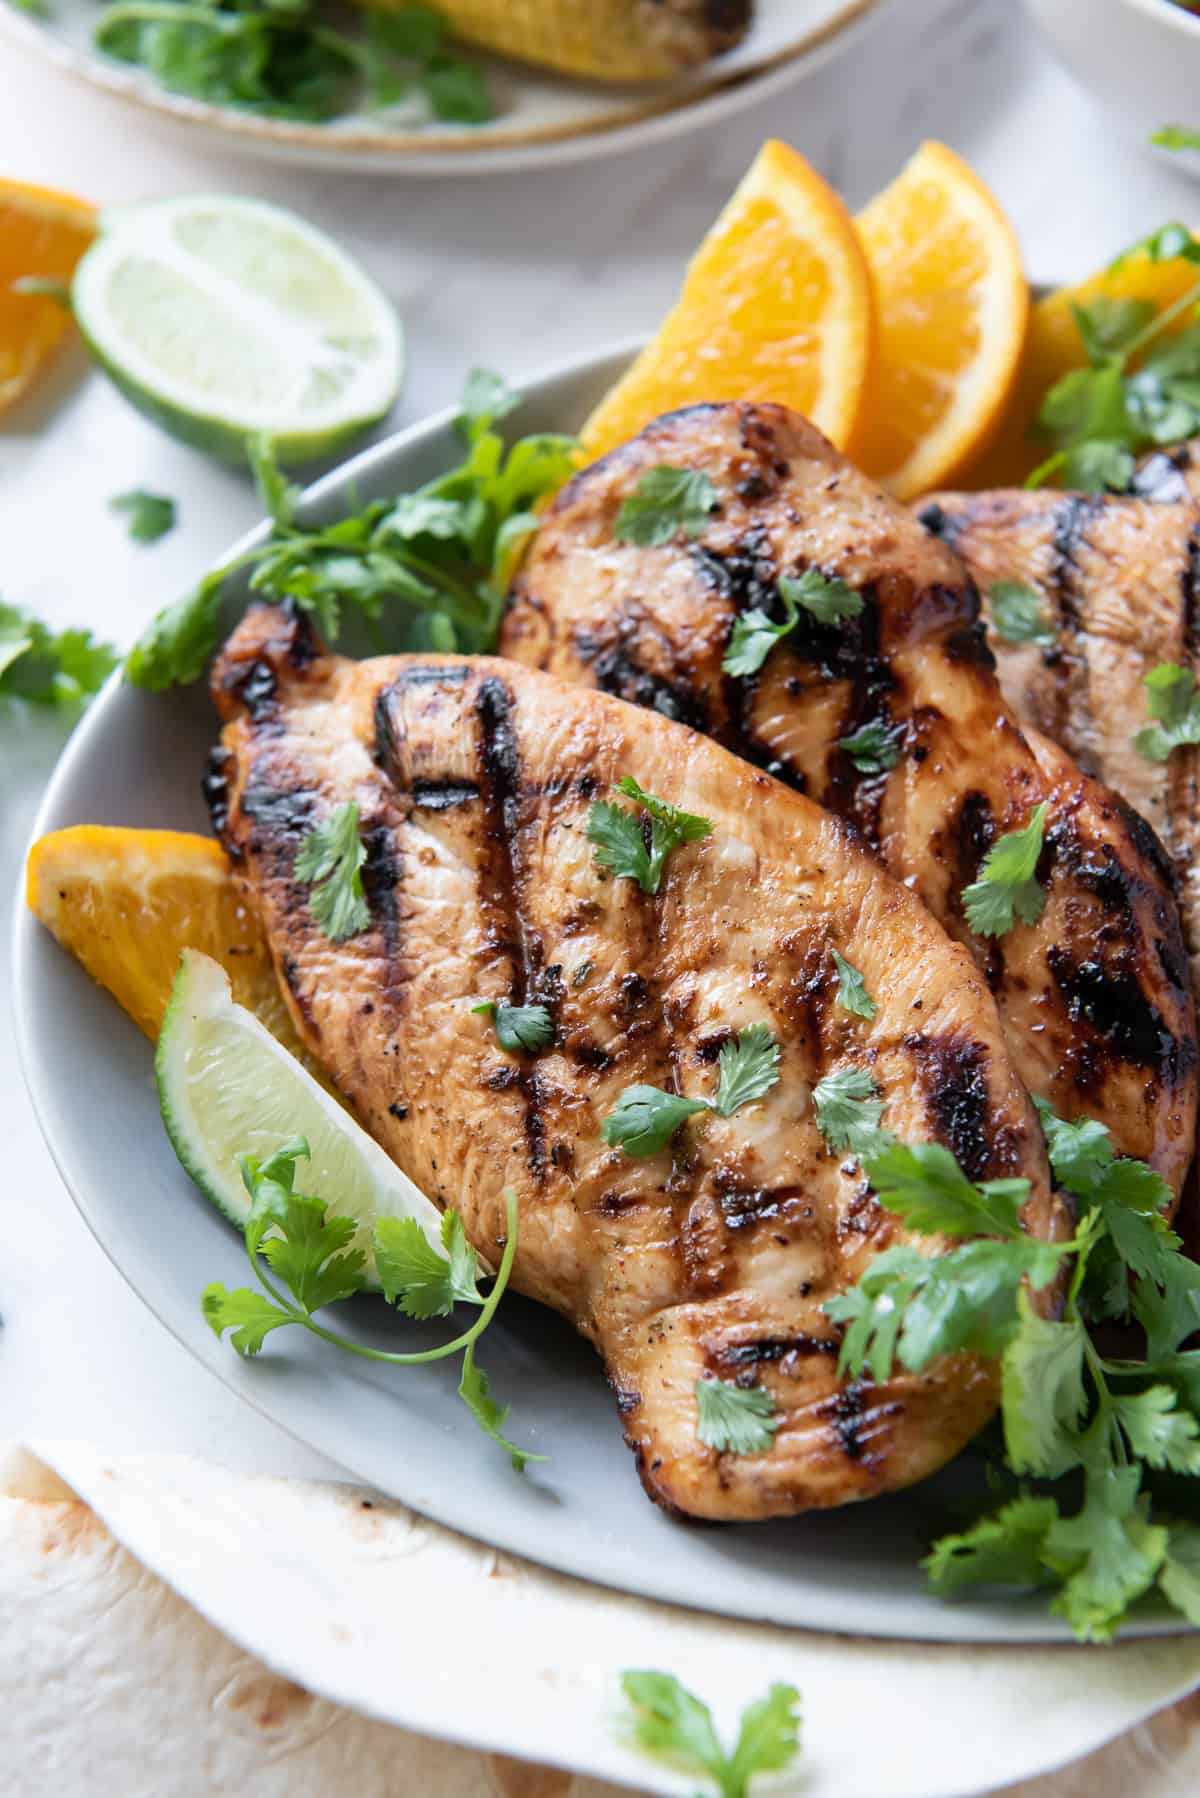 Grilled chicken on a plate with cilantro and orange slices.